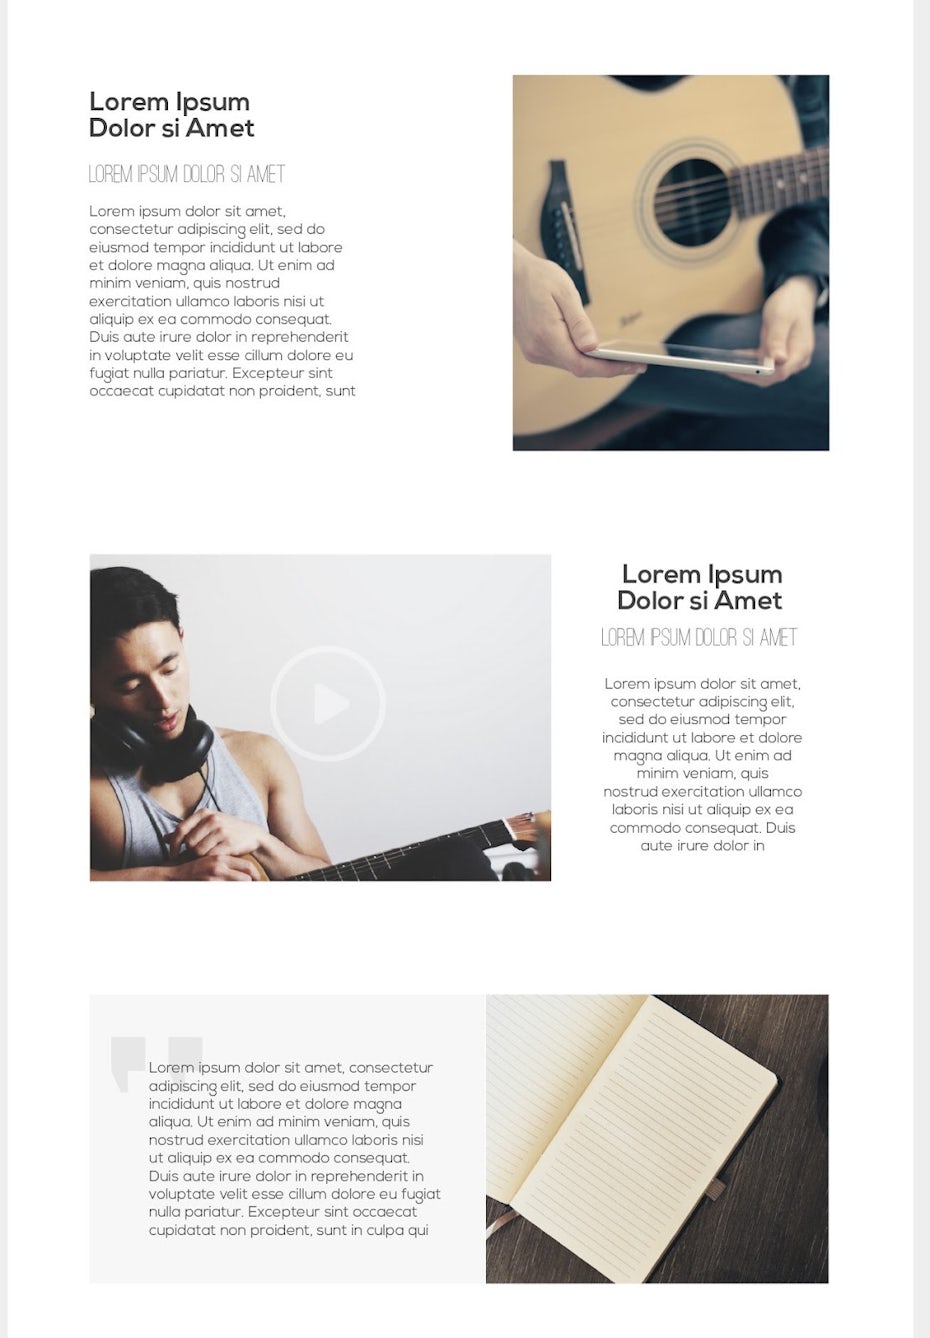 three separate images of a guitar, an Asian man wearing headphones while holding a guitar, and an open notebook